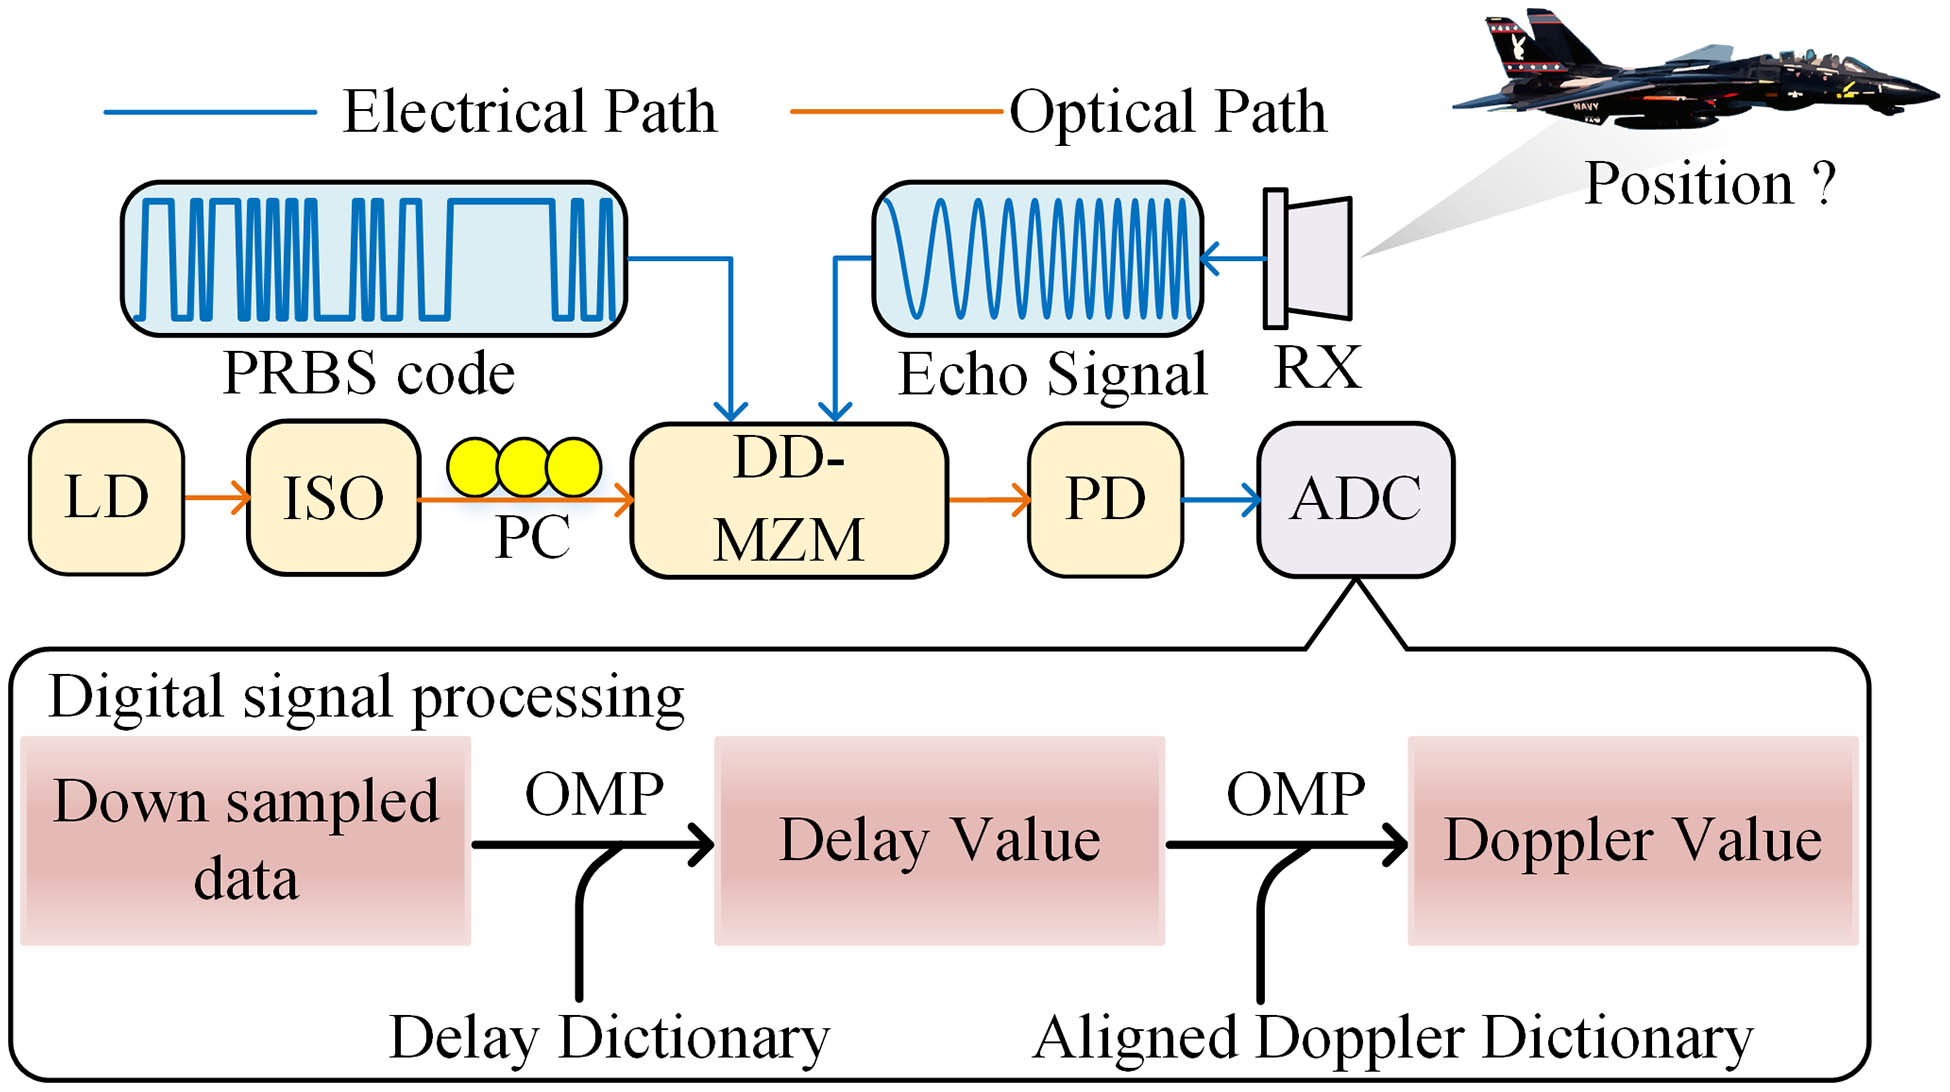 Schematic diagram of the proposed sub-Nyquist radar receiver. LD, laser diode; ISO, optical isolator; PC, polarization controller; DD-MZM, dual-drive Mach–Zehnder modulator; PD, photodetector; PRBS, pseudo-random binary sequence; ADC, analog-to-digital converter; OMP, orthogonal matching pursuit; RX, receiving antenna.